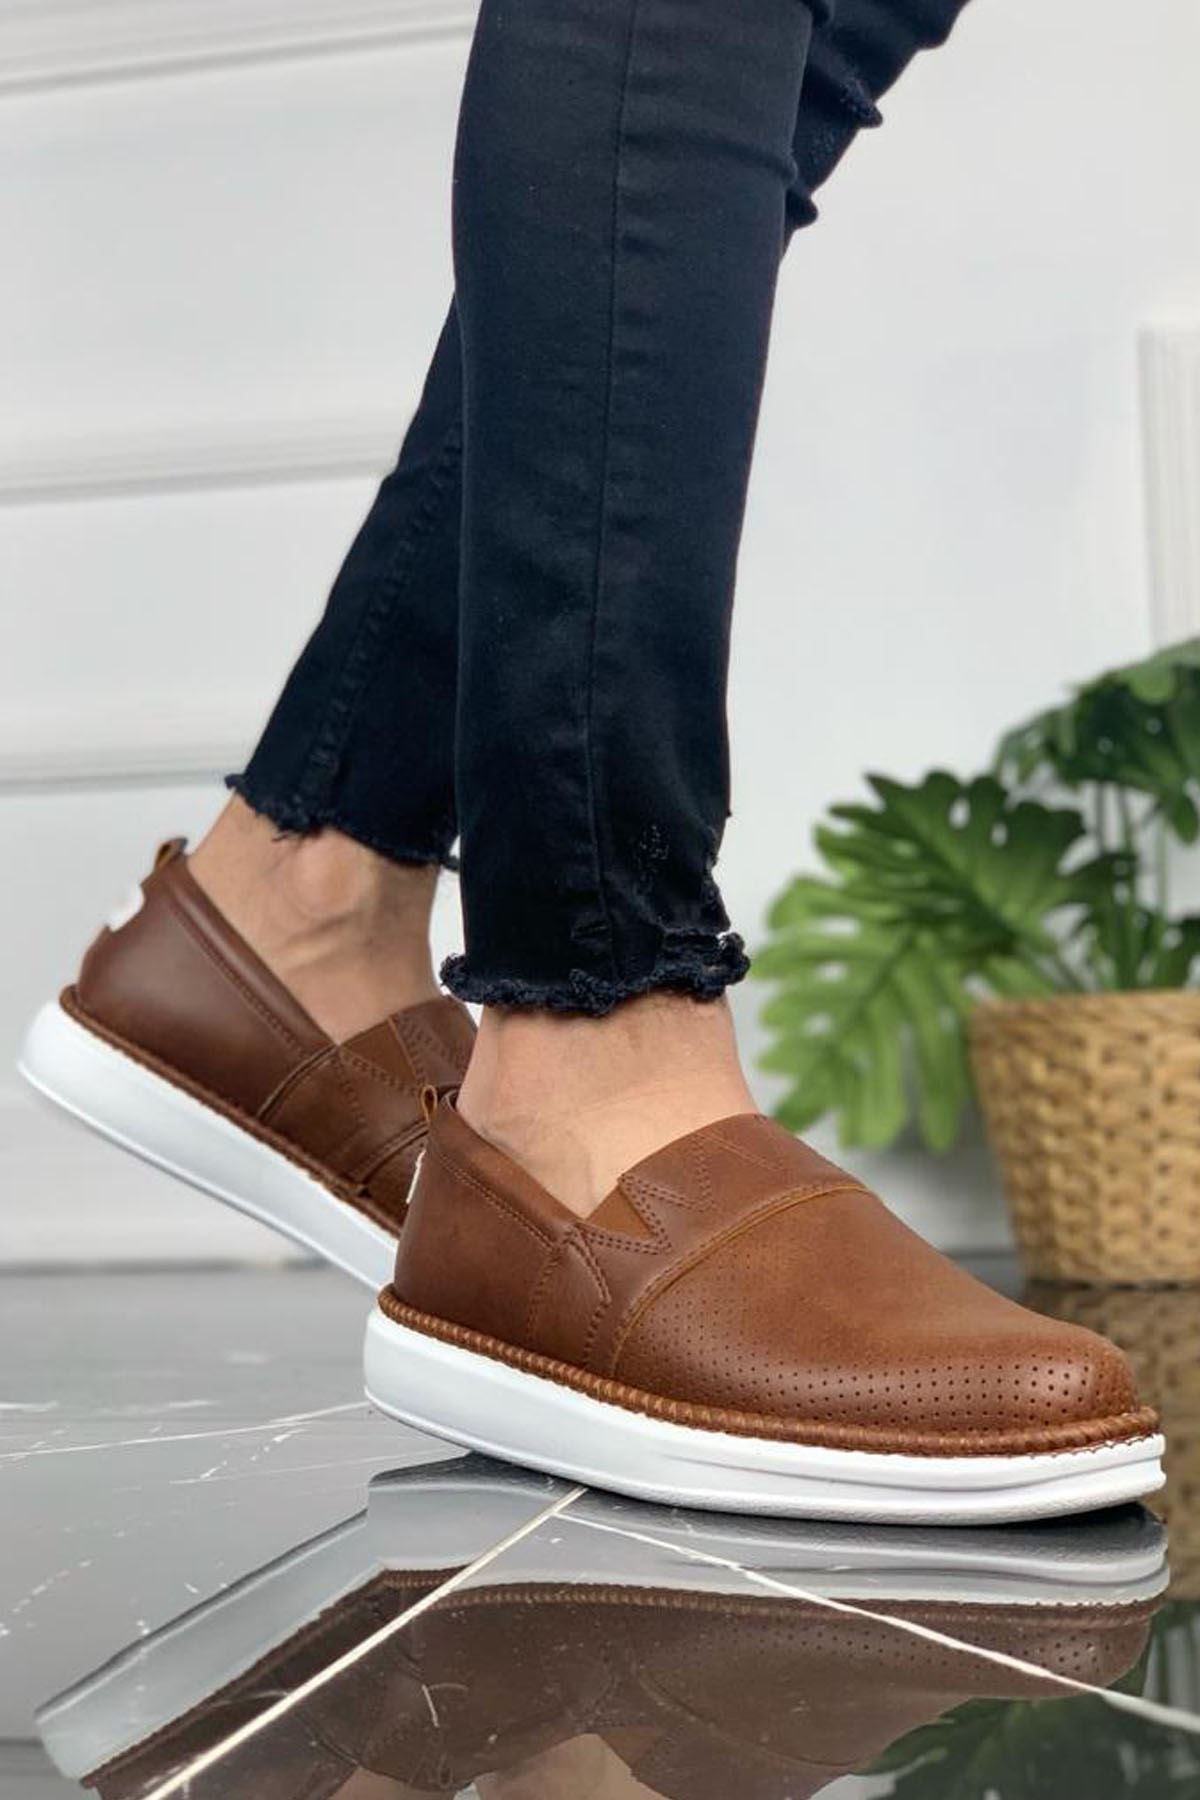 CH091 Men's Brown-White Sole Leather Casual Sports Shoes - STREET MODE ™